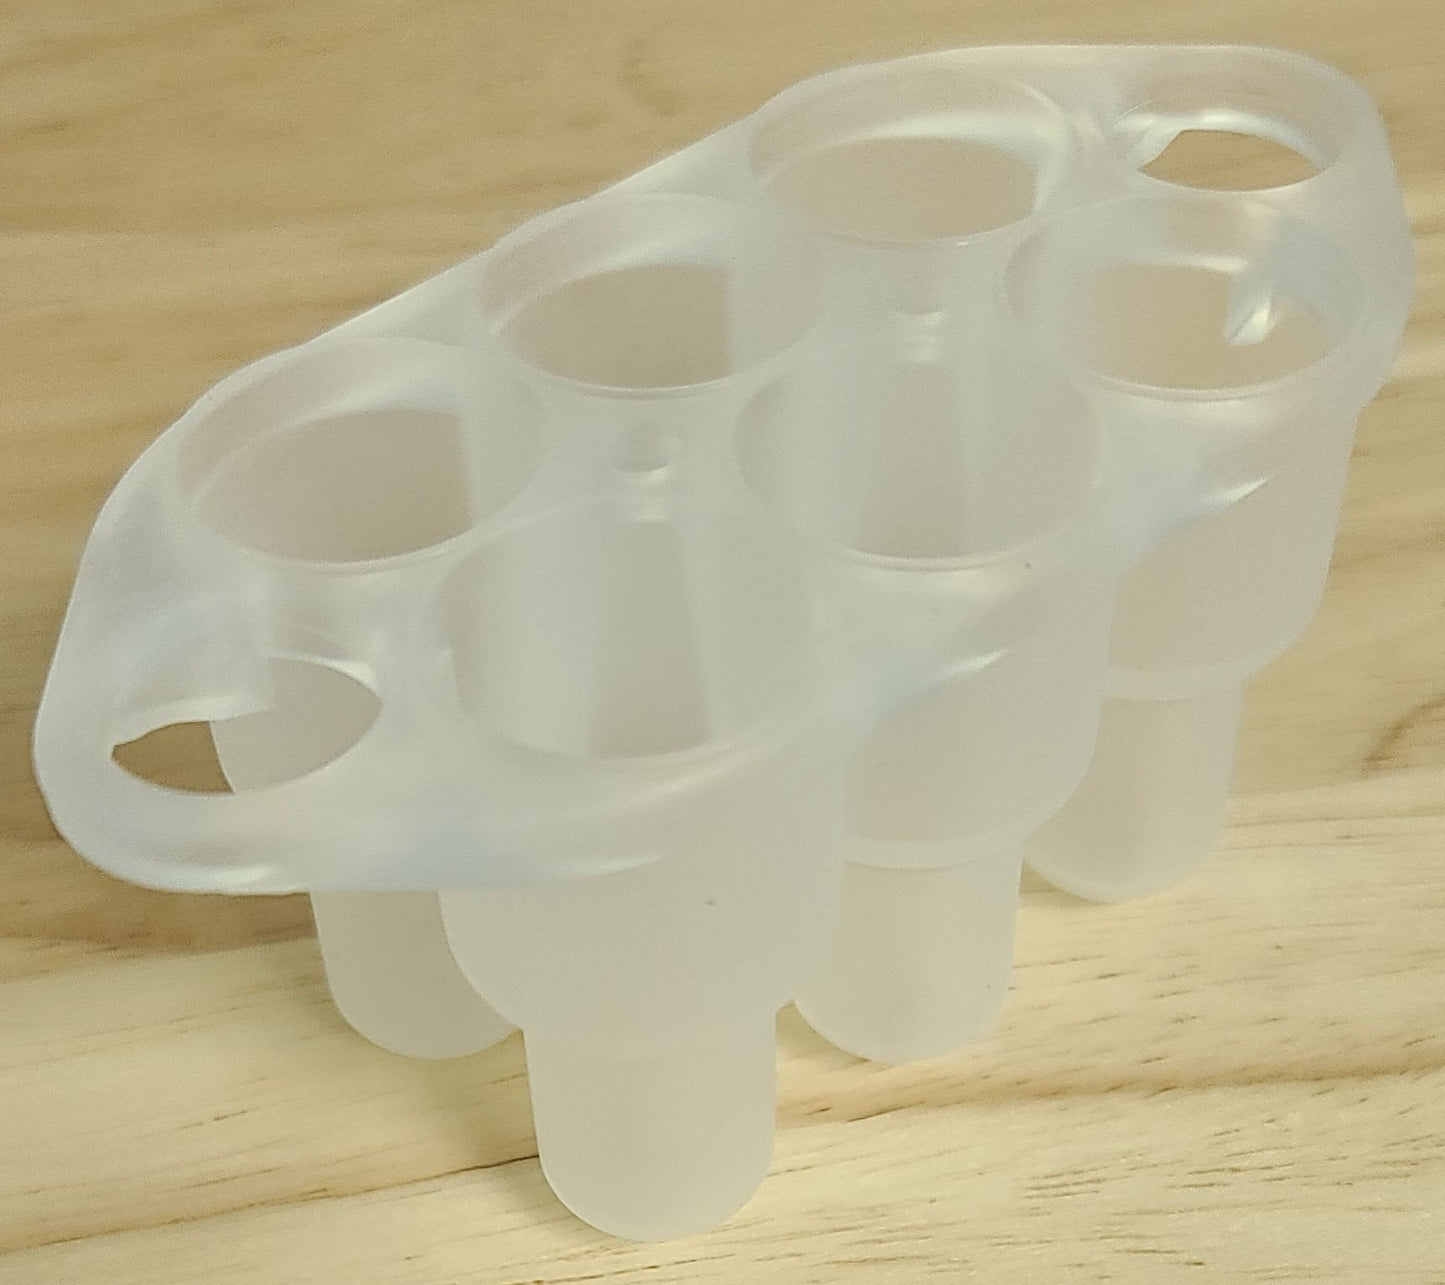 Nippii® Freezable Pacifier Ice Cube Tray